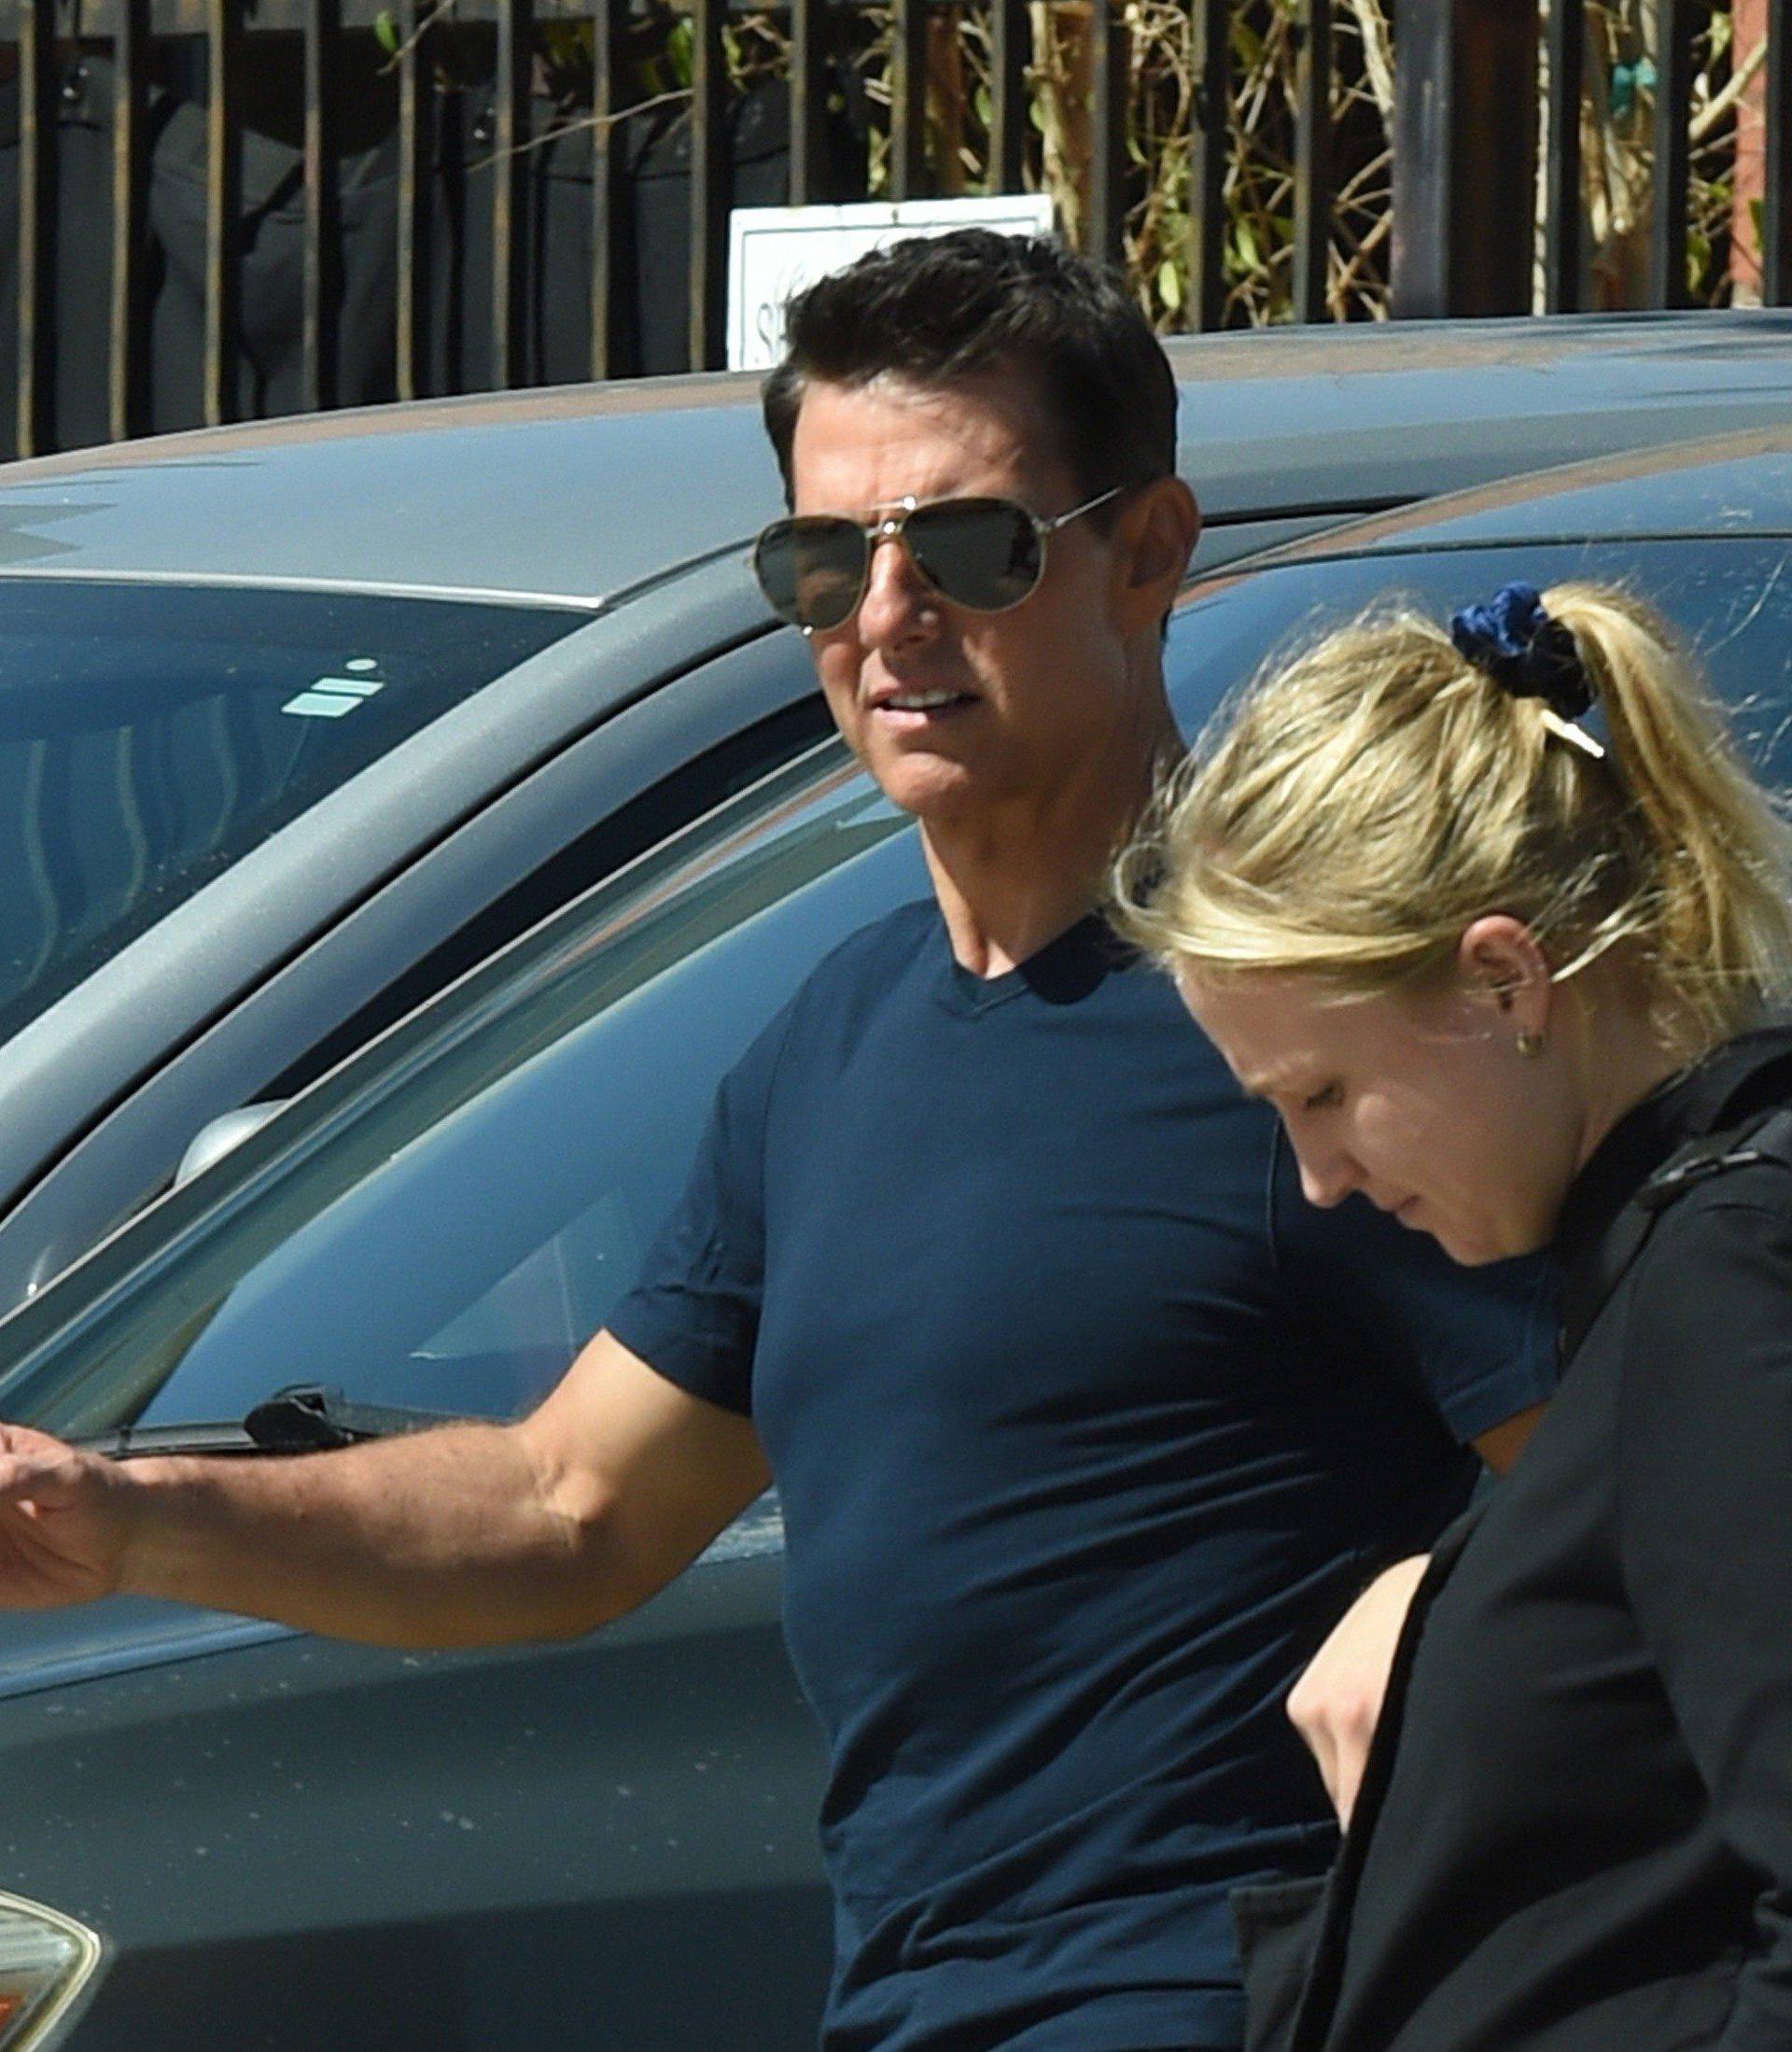 EXCLUSIVE: Tom Cruise is spotted heading to the studio with a female companion in Los Angeles.